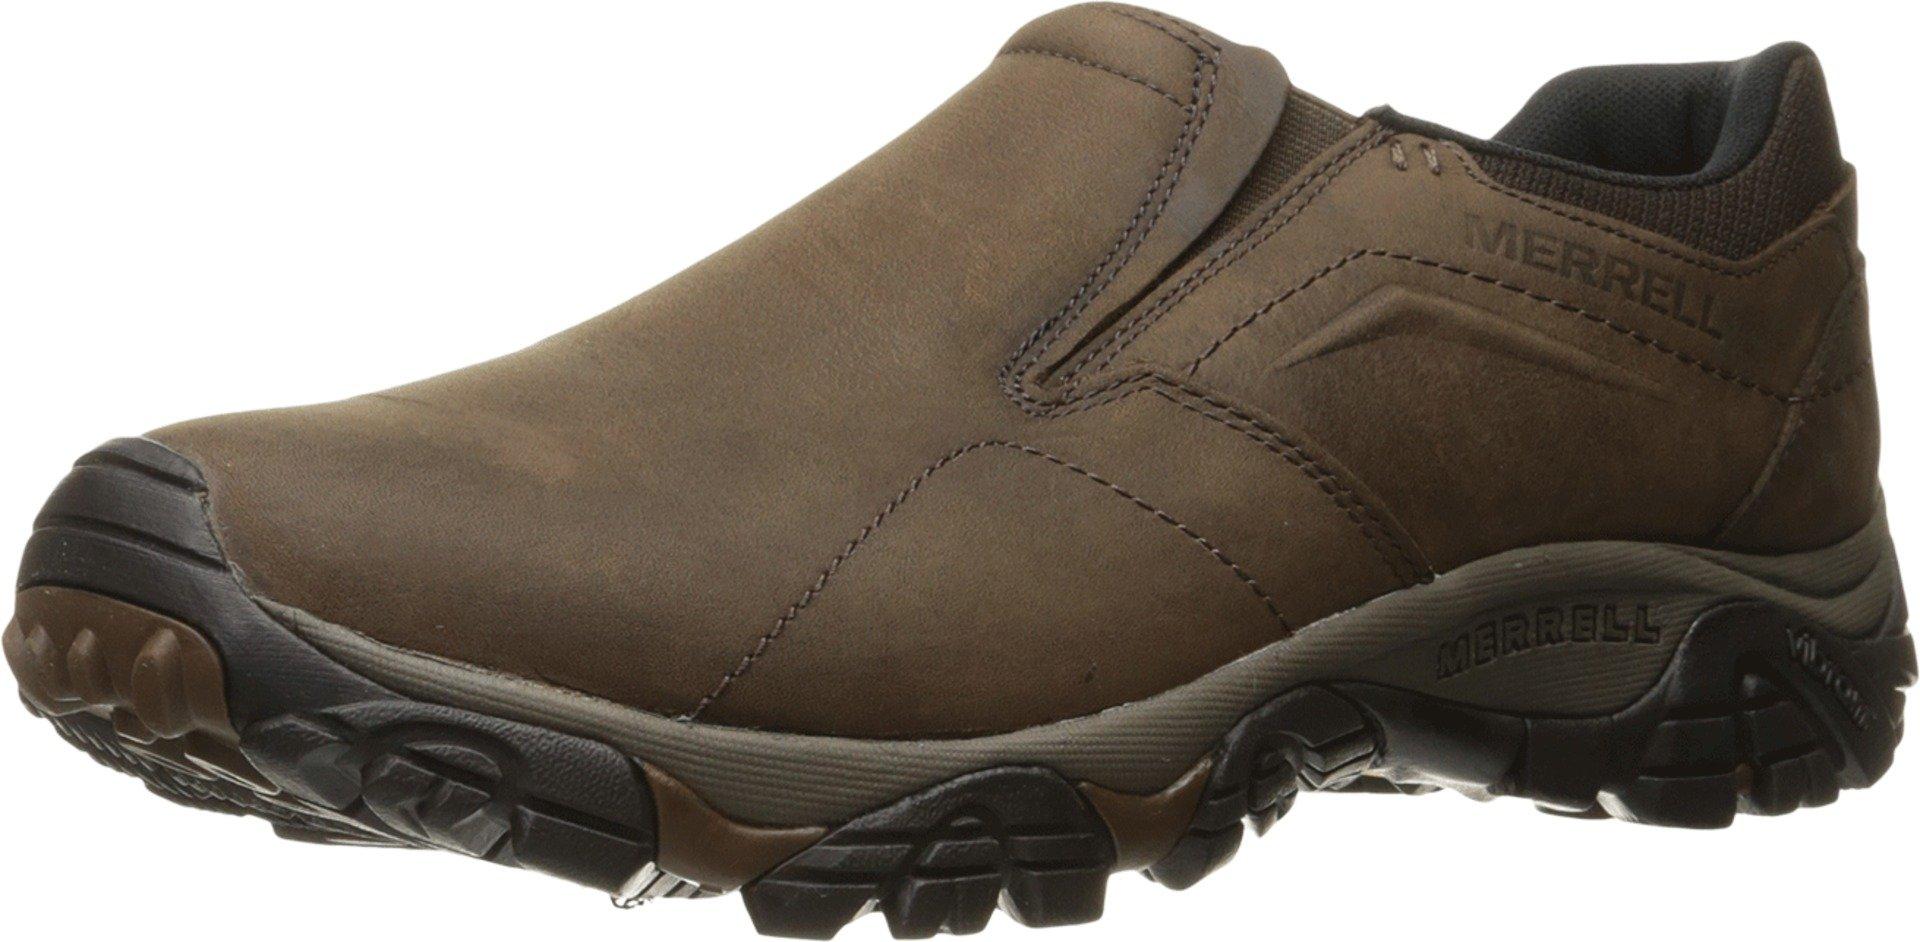 Merrell Leather Moab Adventure Moc in Brown for Men - Lyst